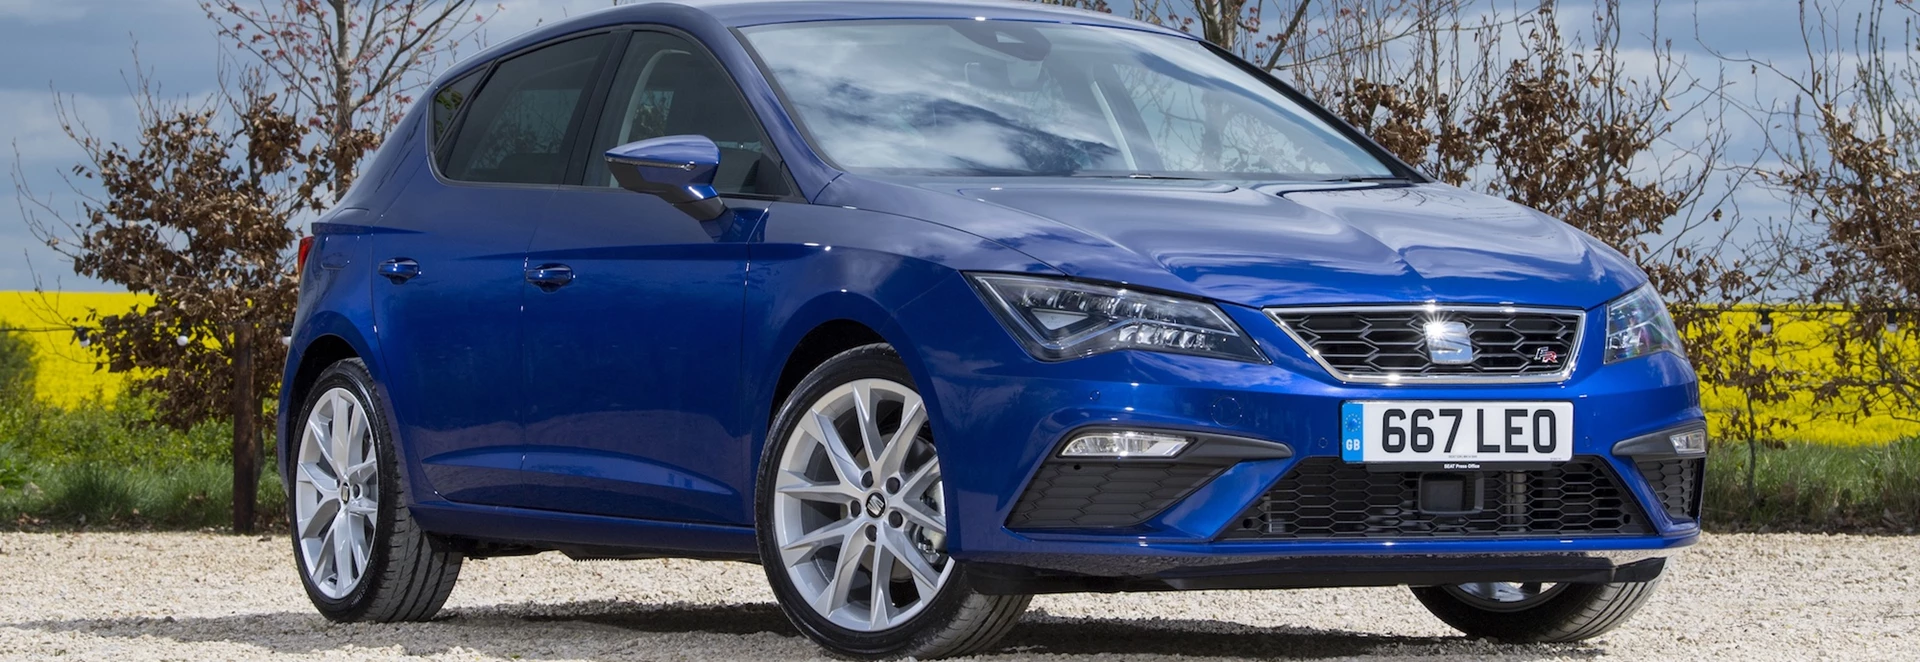 Seat’s Leon is going hybrid — what can we expect? 